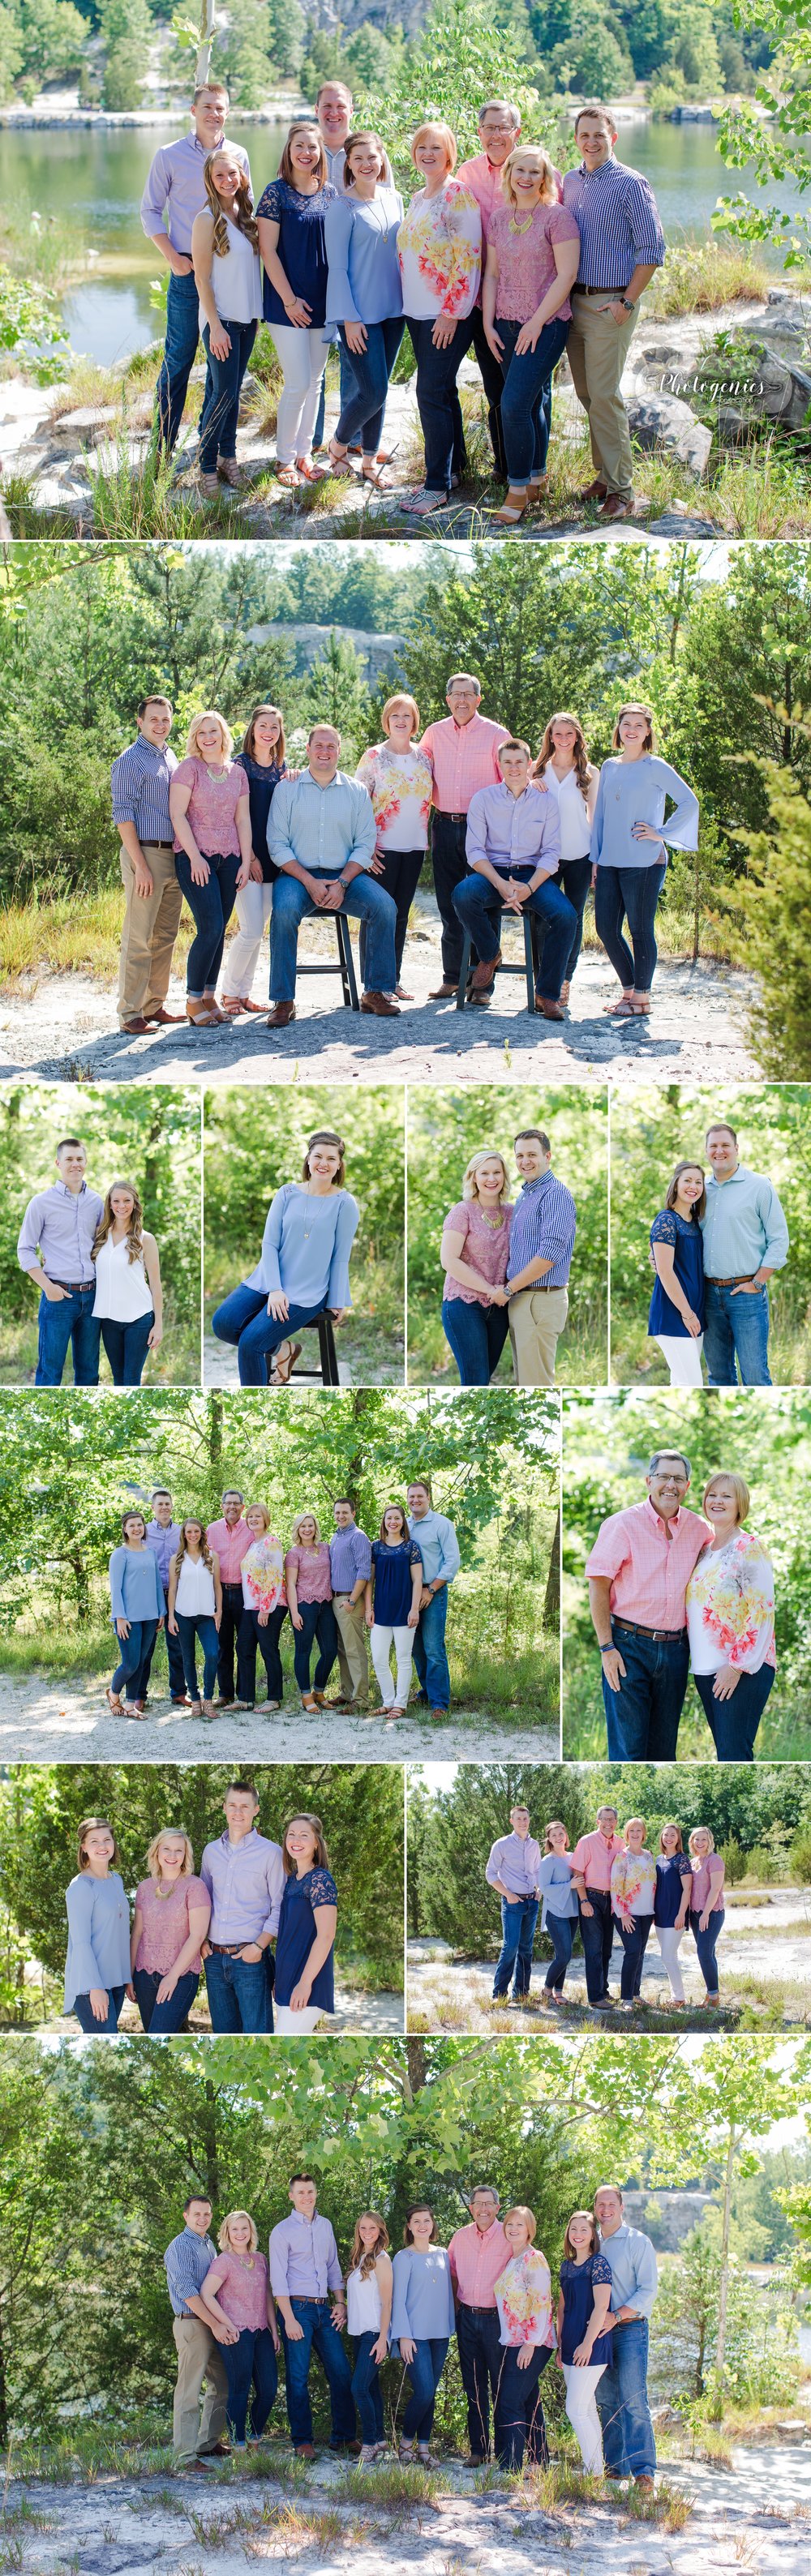  extended_family_session_photography_poses_ideas_colors_what_to_wear_large_group_klondike_park_missouri_family 